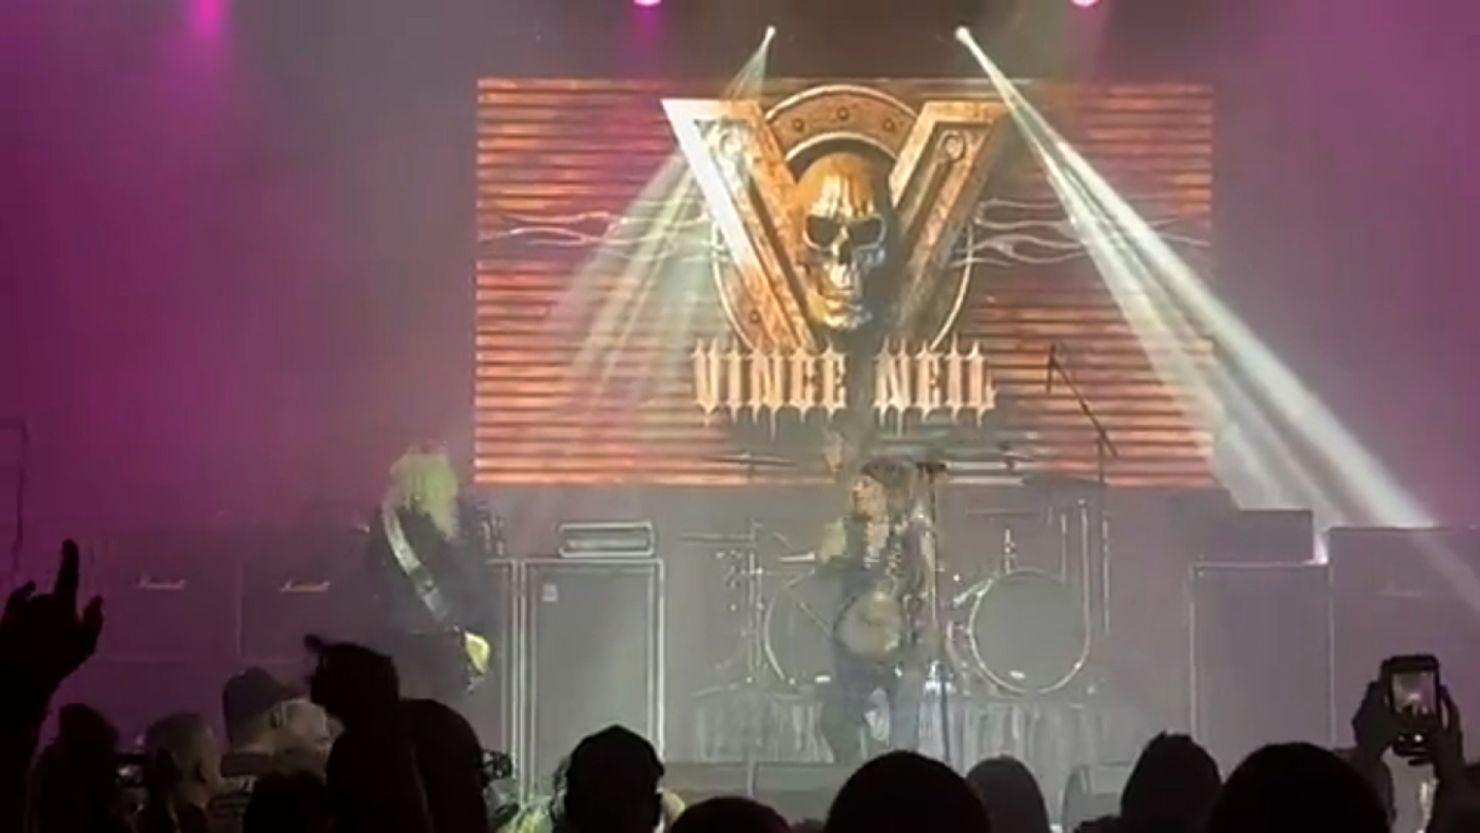 Mötley Crüe singer Vince Neil performs with his solo band just seconds before he fell off stage in Tennessee on Friday, October 15, 2021.